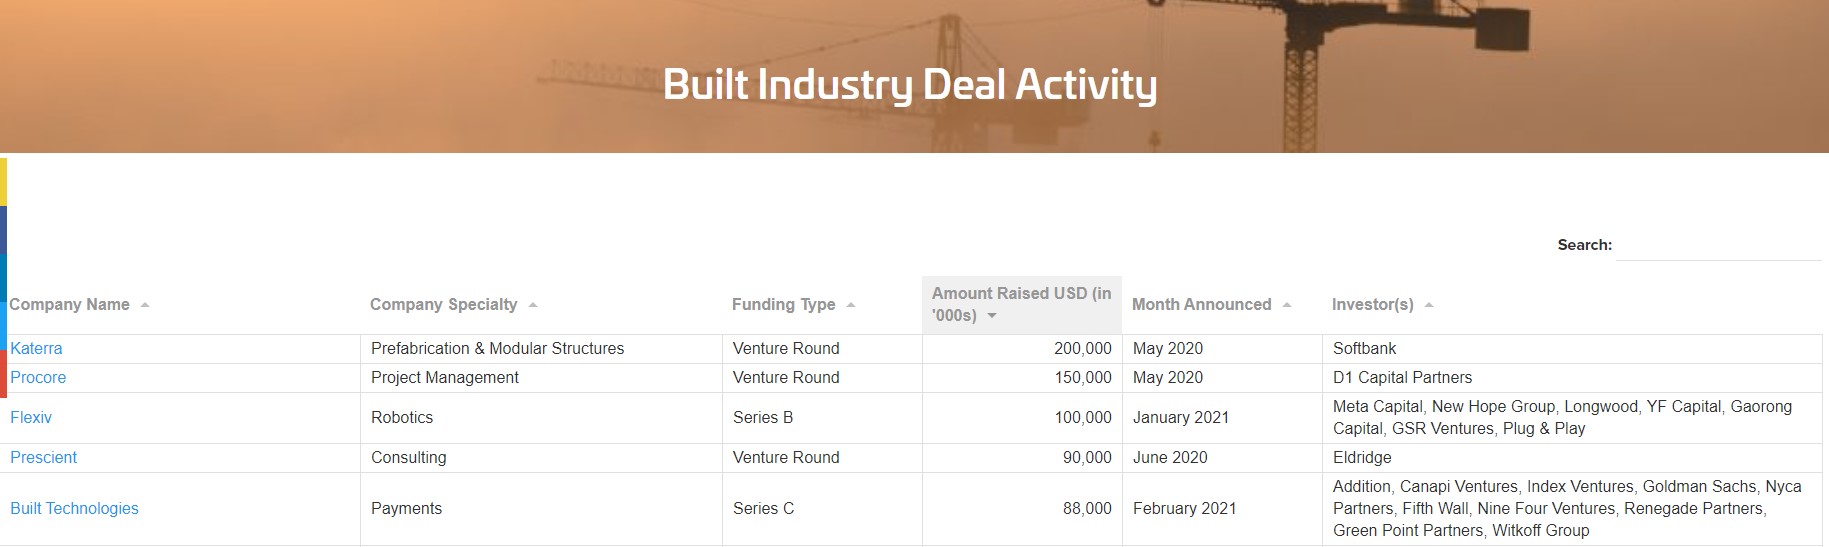 Deal Activity Preview